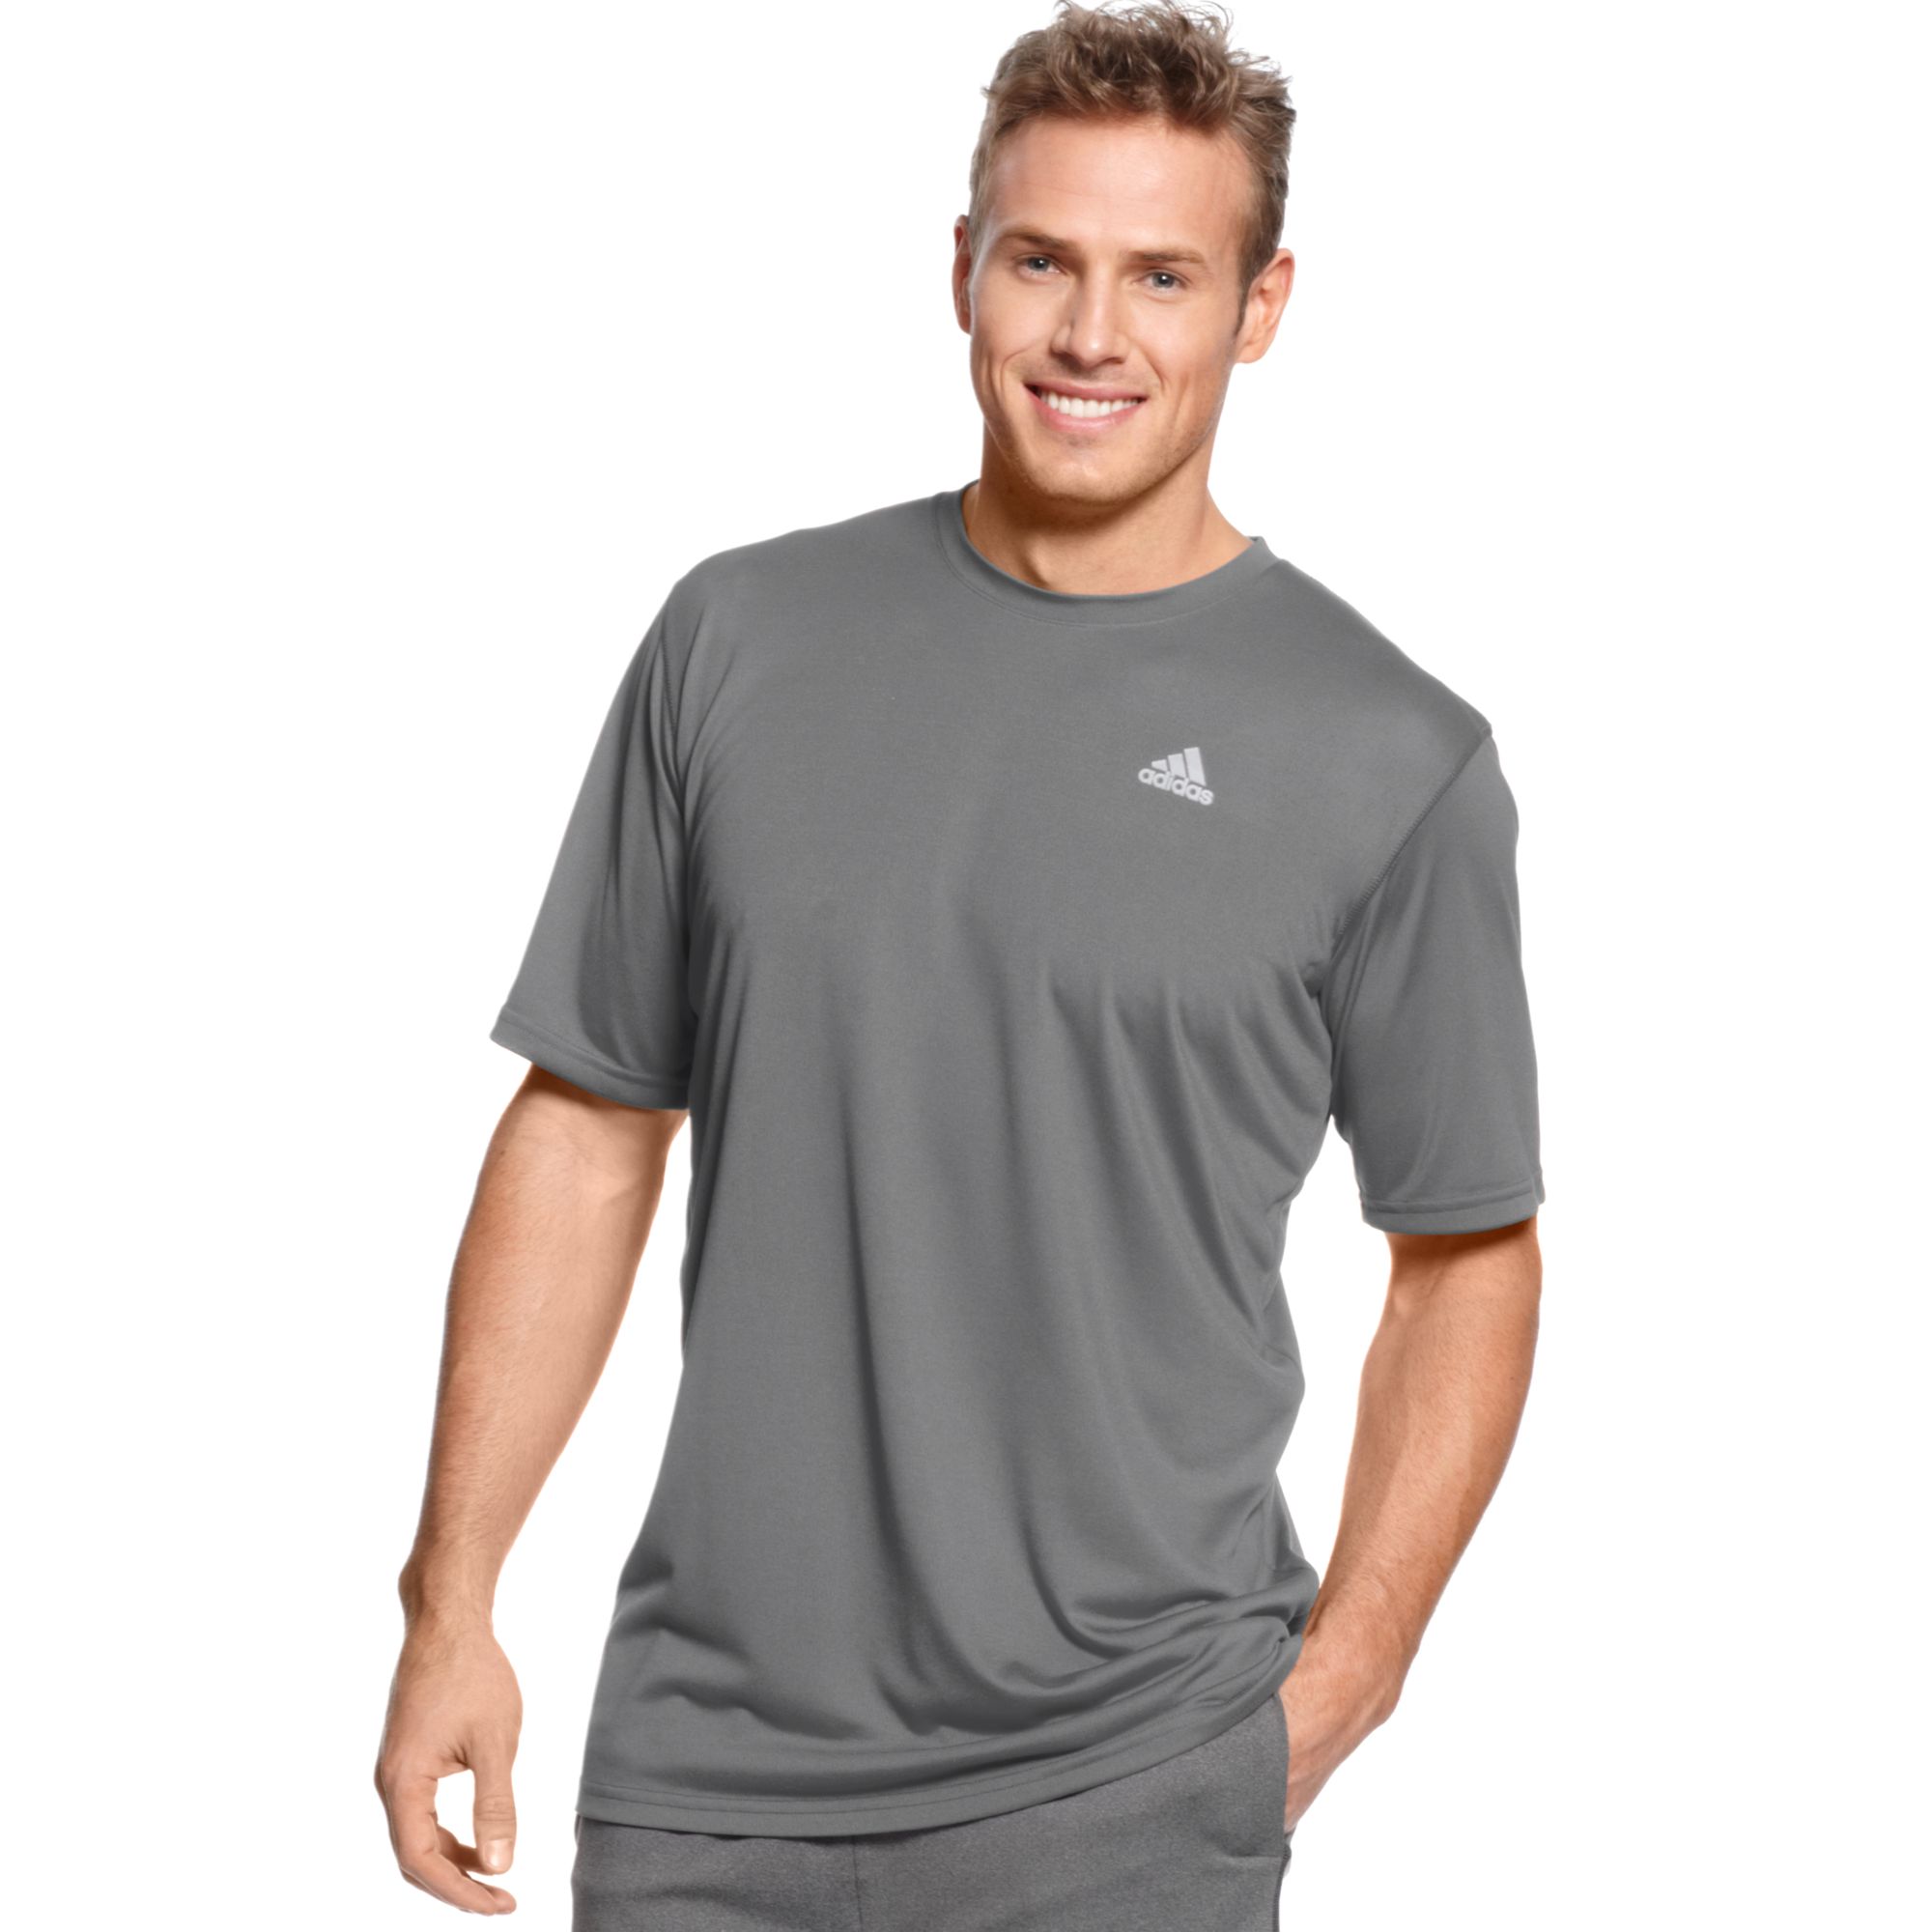  adidas  Climalite T  Shirt  in Dark Grey Heather Gray for 